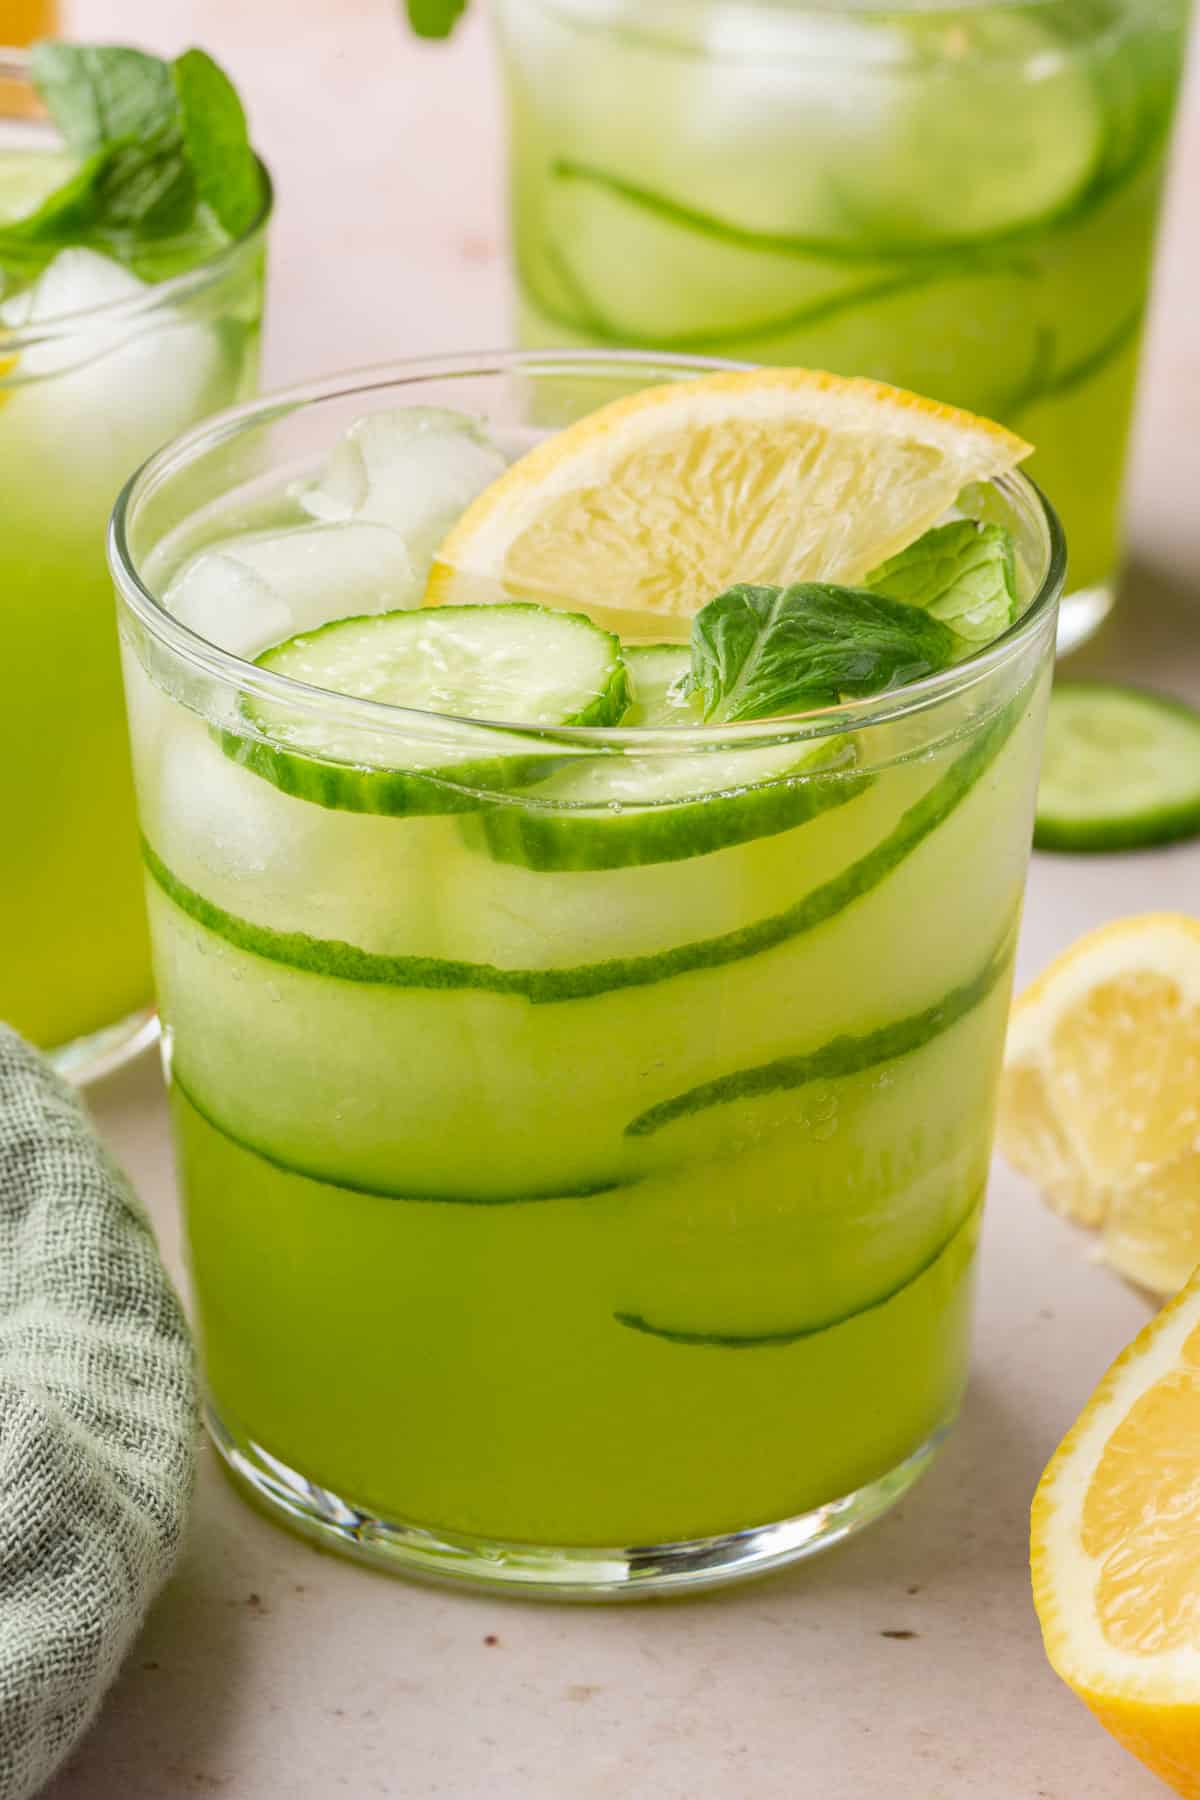 A glass of cucumber lemonade with ice, a lemon wedge and slices of cucumber with more glasses in the background.